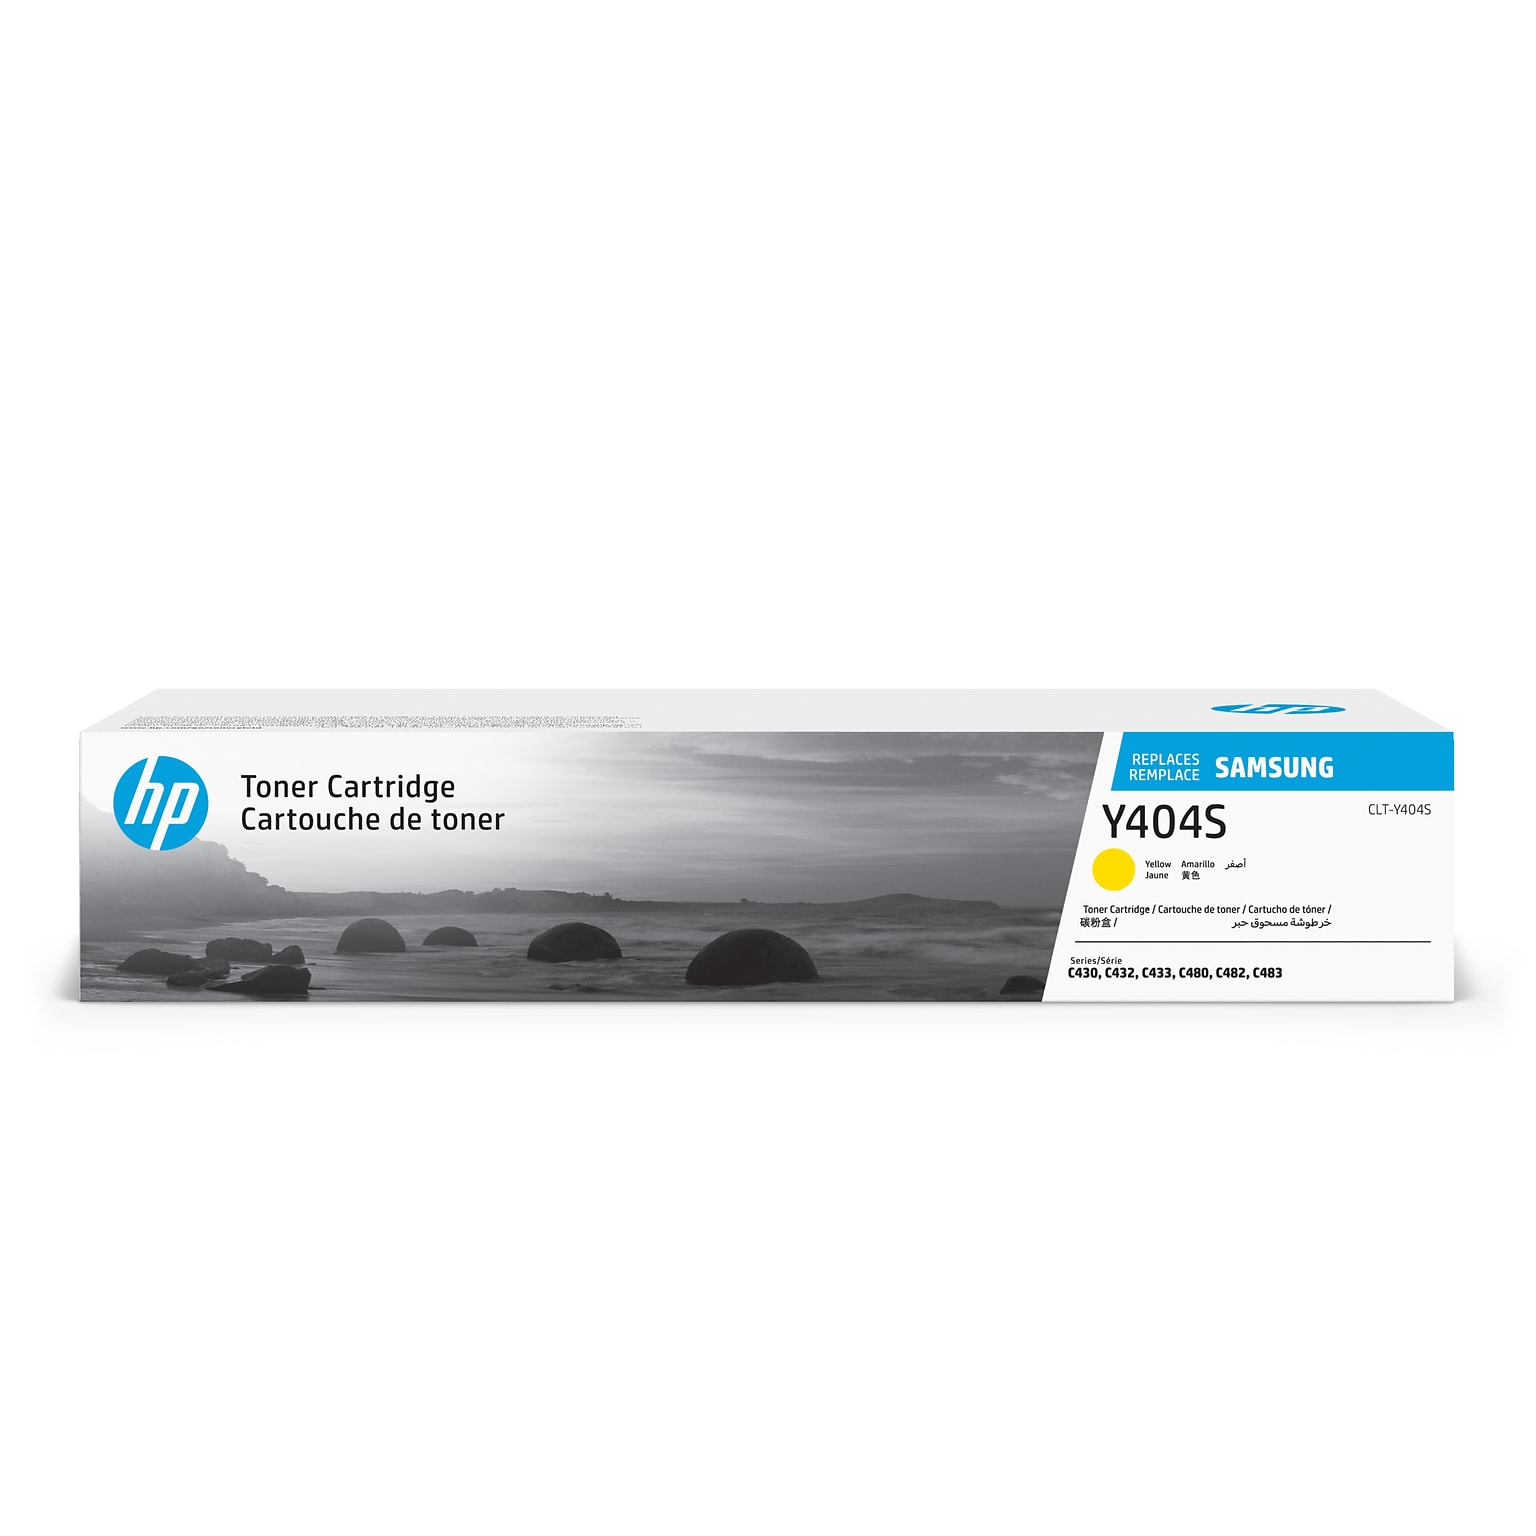 HP Y404S Yellow Toner Cartridge for Samsung CLT-Y404S (SU444), Samsung-branded printer supplies are now HP-branded